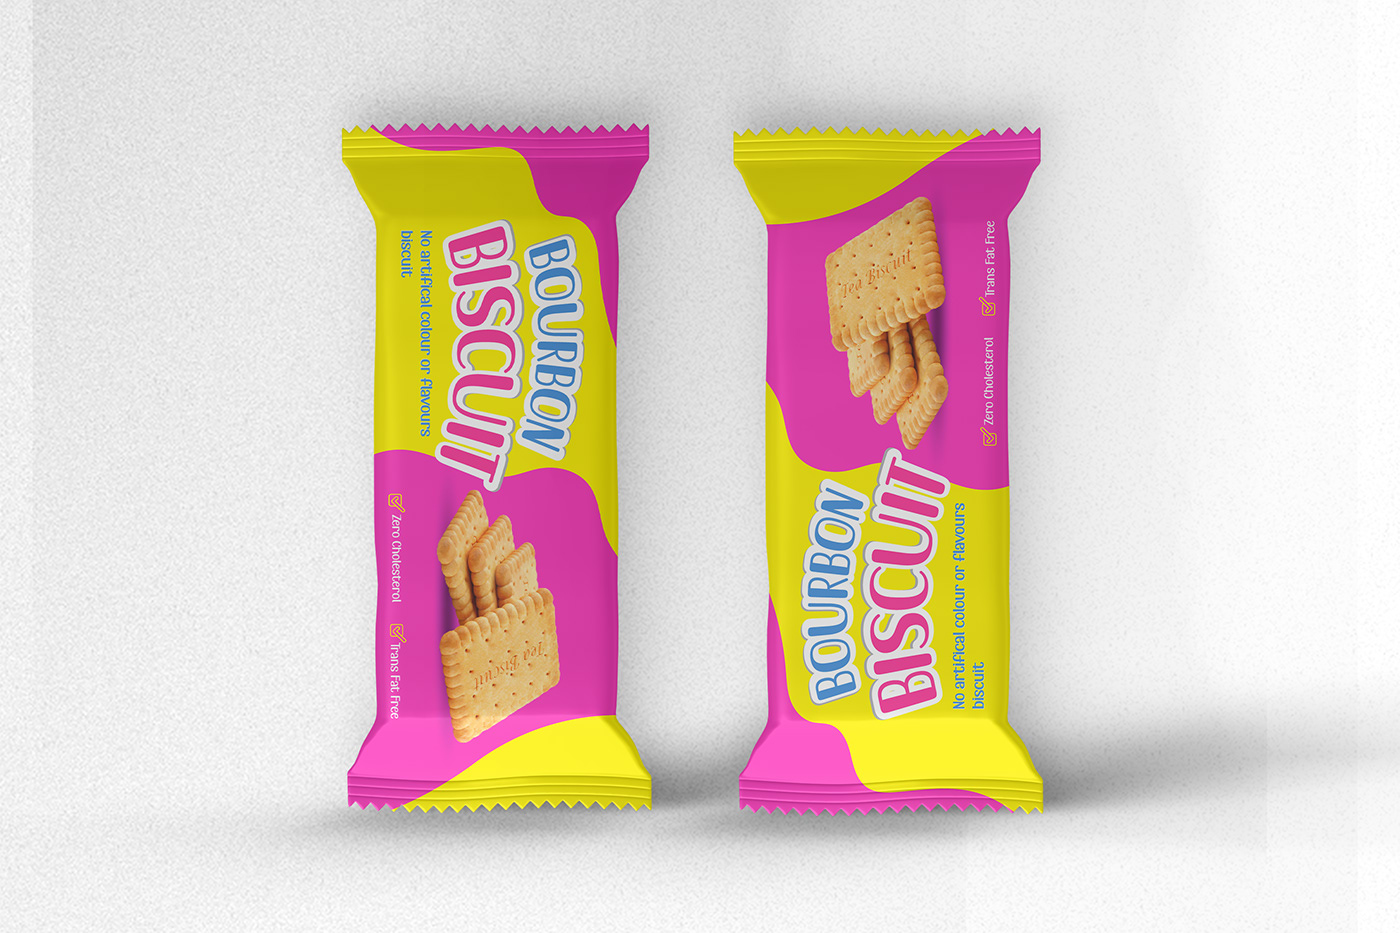 biscuit packaging packagingdesign product packaging Biscuits Packaging Design Food Packaging custom packaging Pouch Design  amazon design Food customer service PACKAGING EXPERT